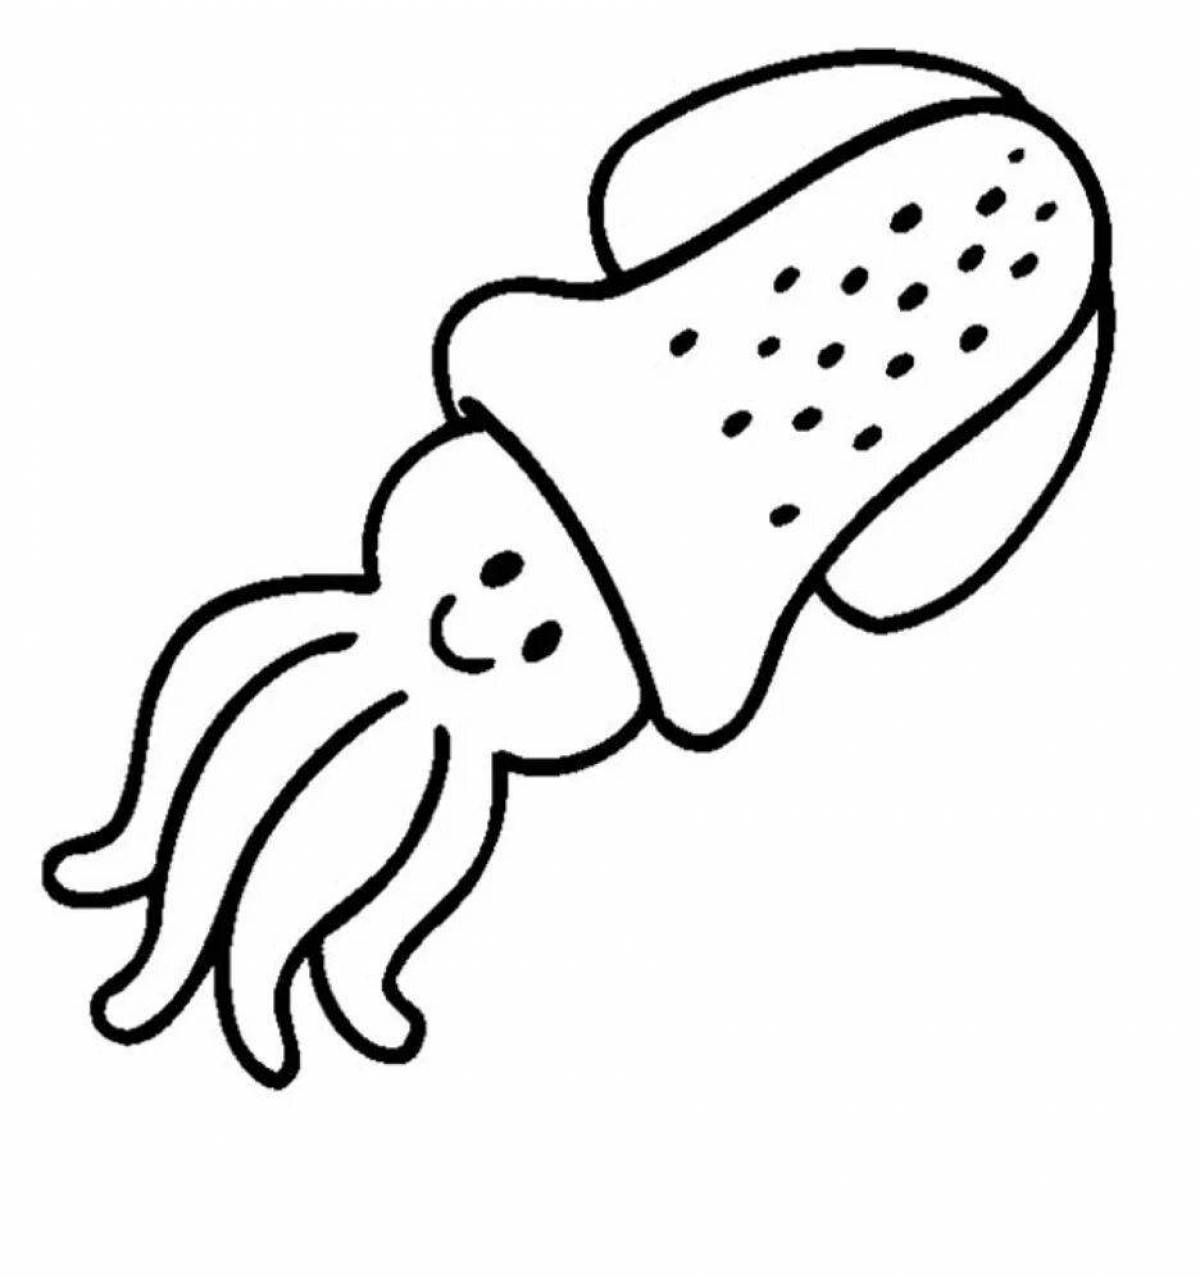 Fun coloring squid for kids